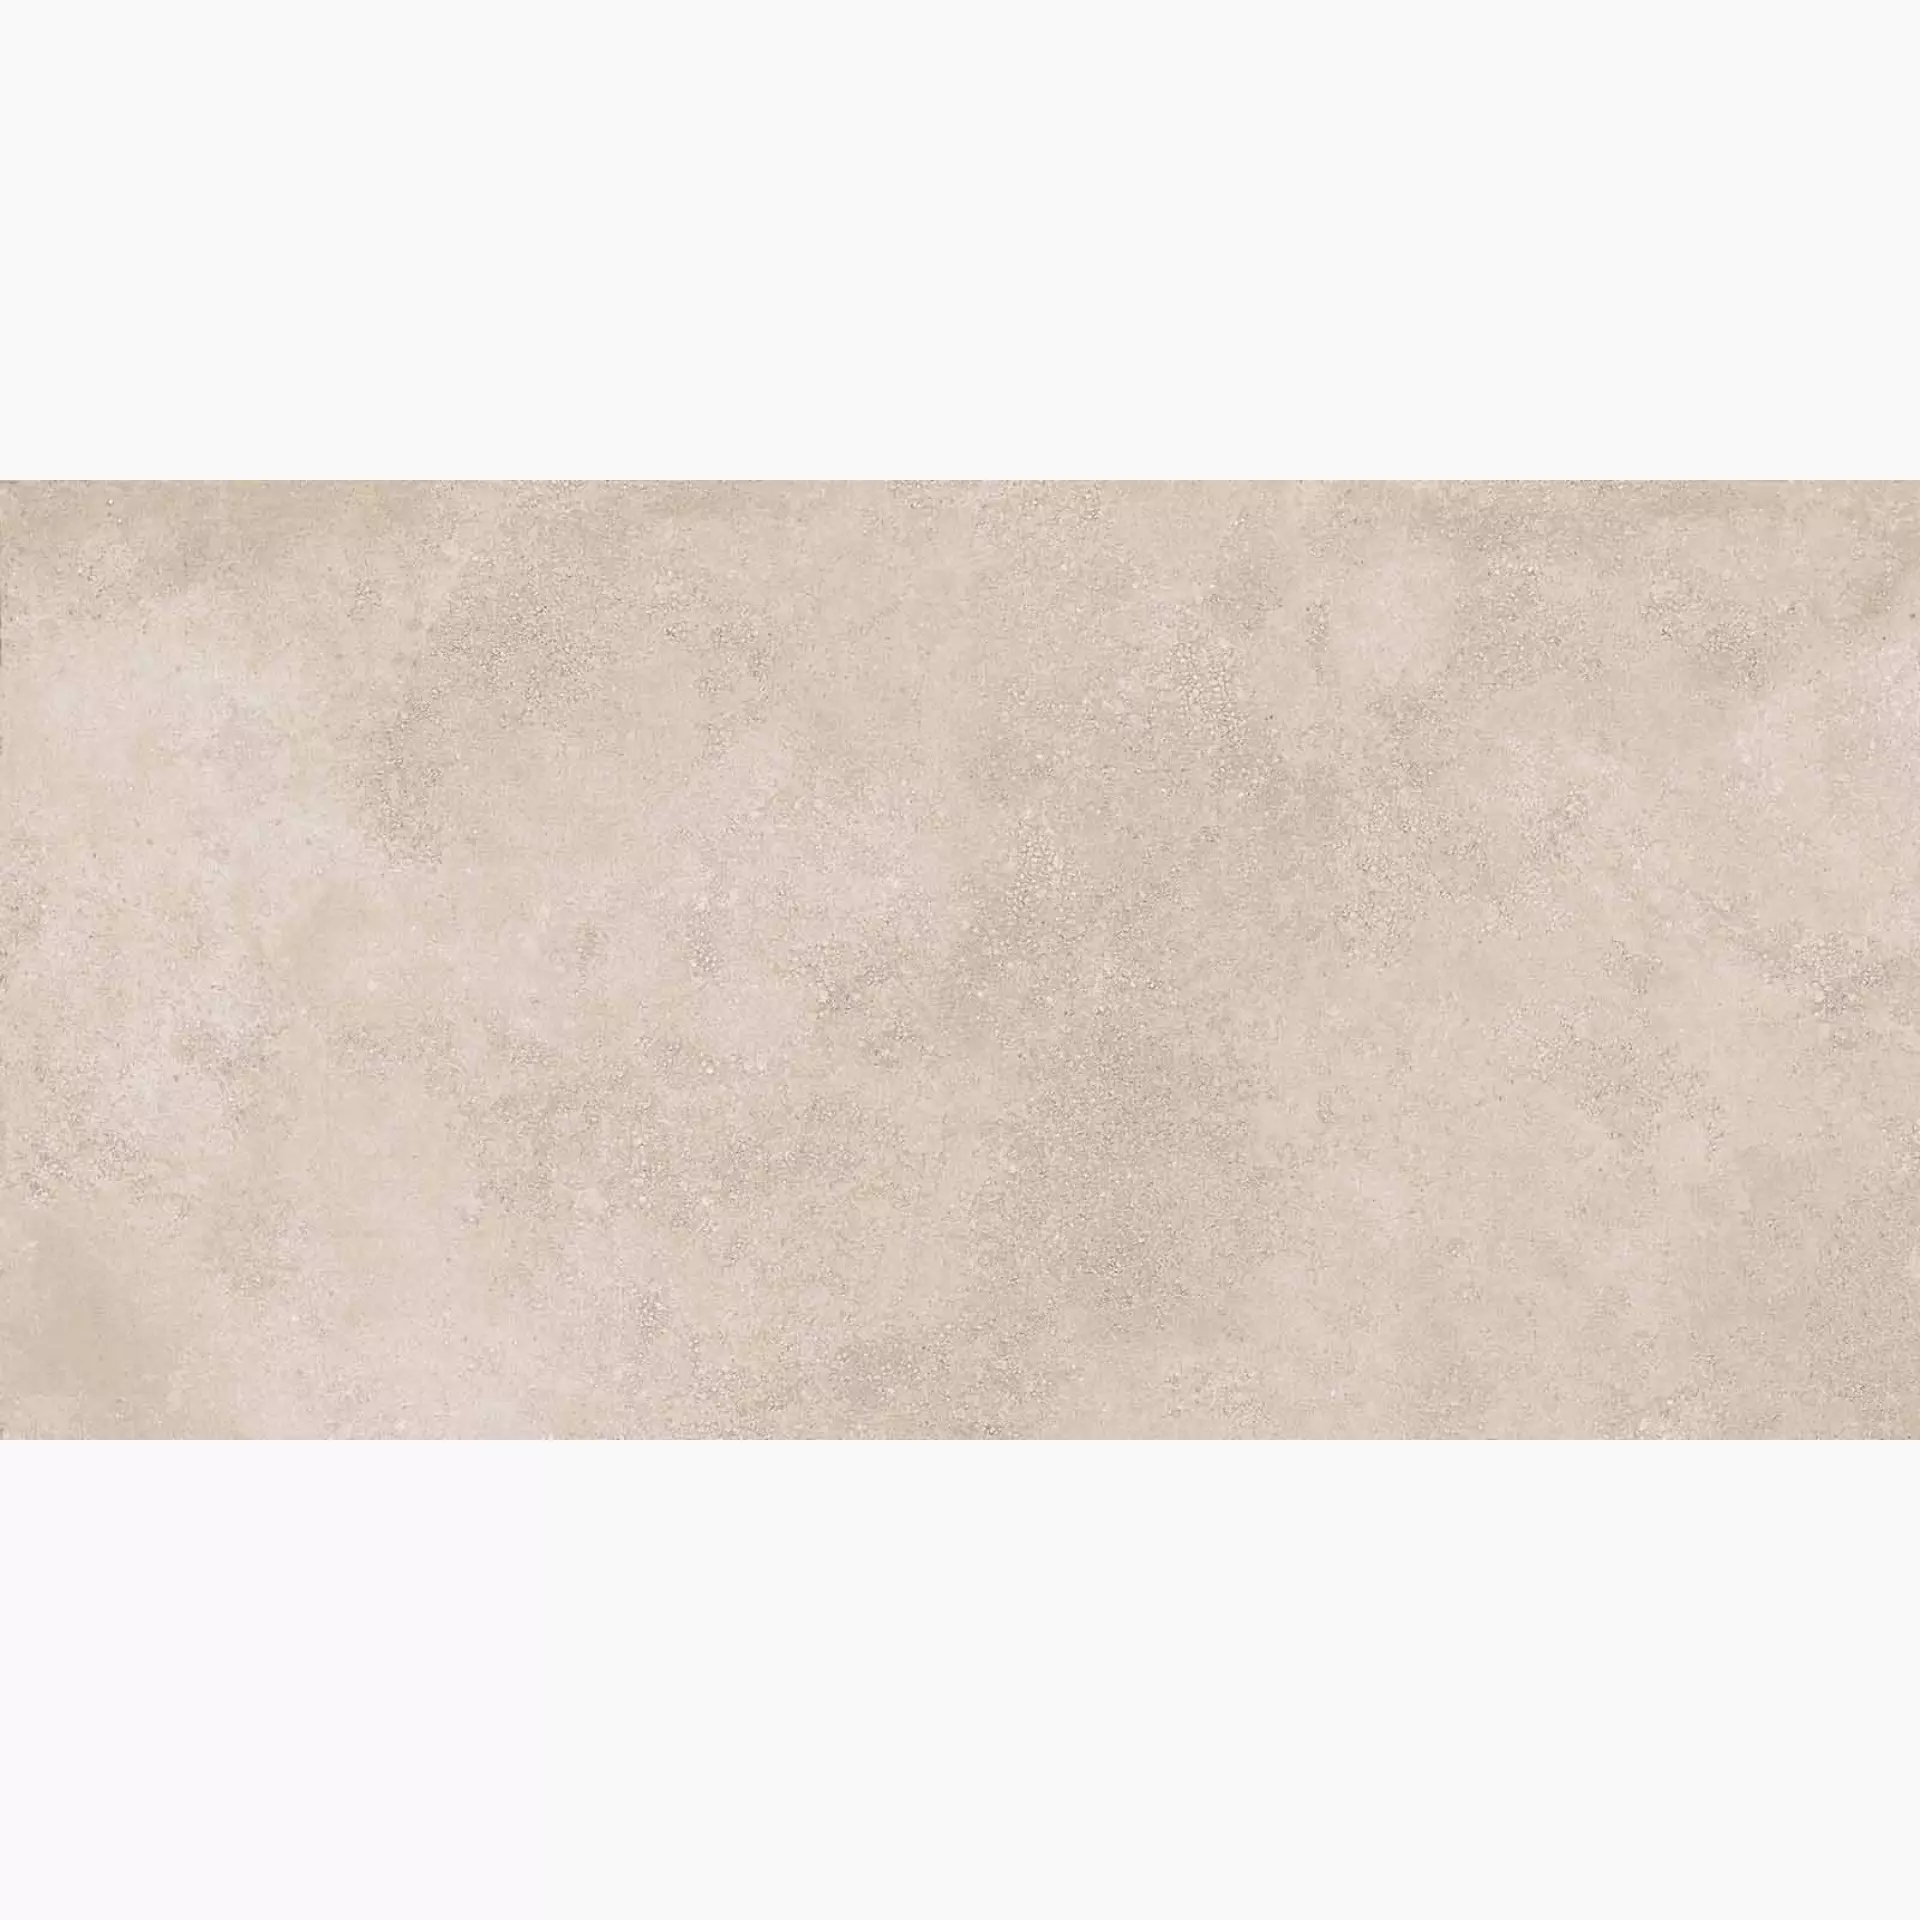 Keope Geo Ivory Strutturato 484A3244 60x120cm rectified 9mm